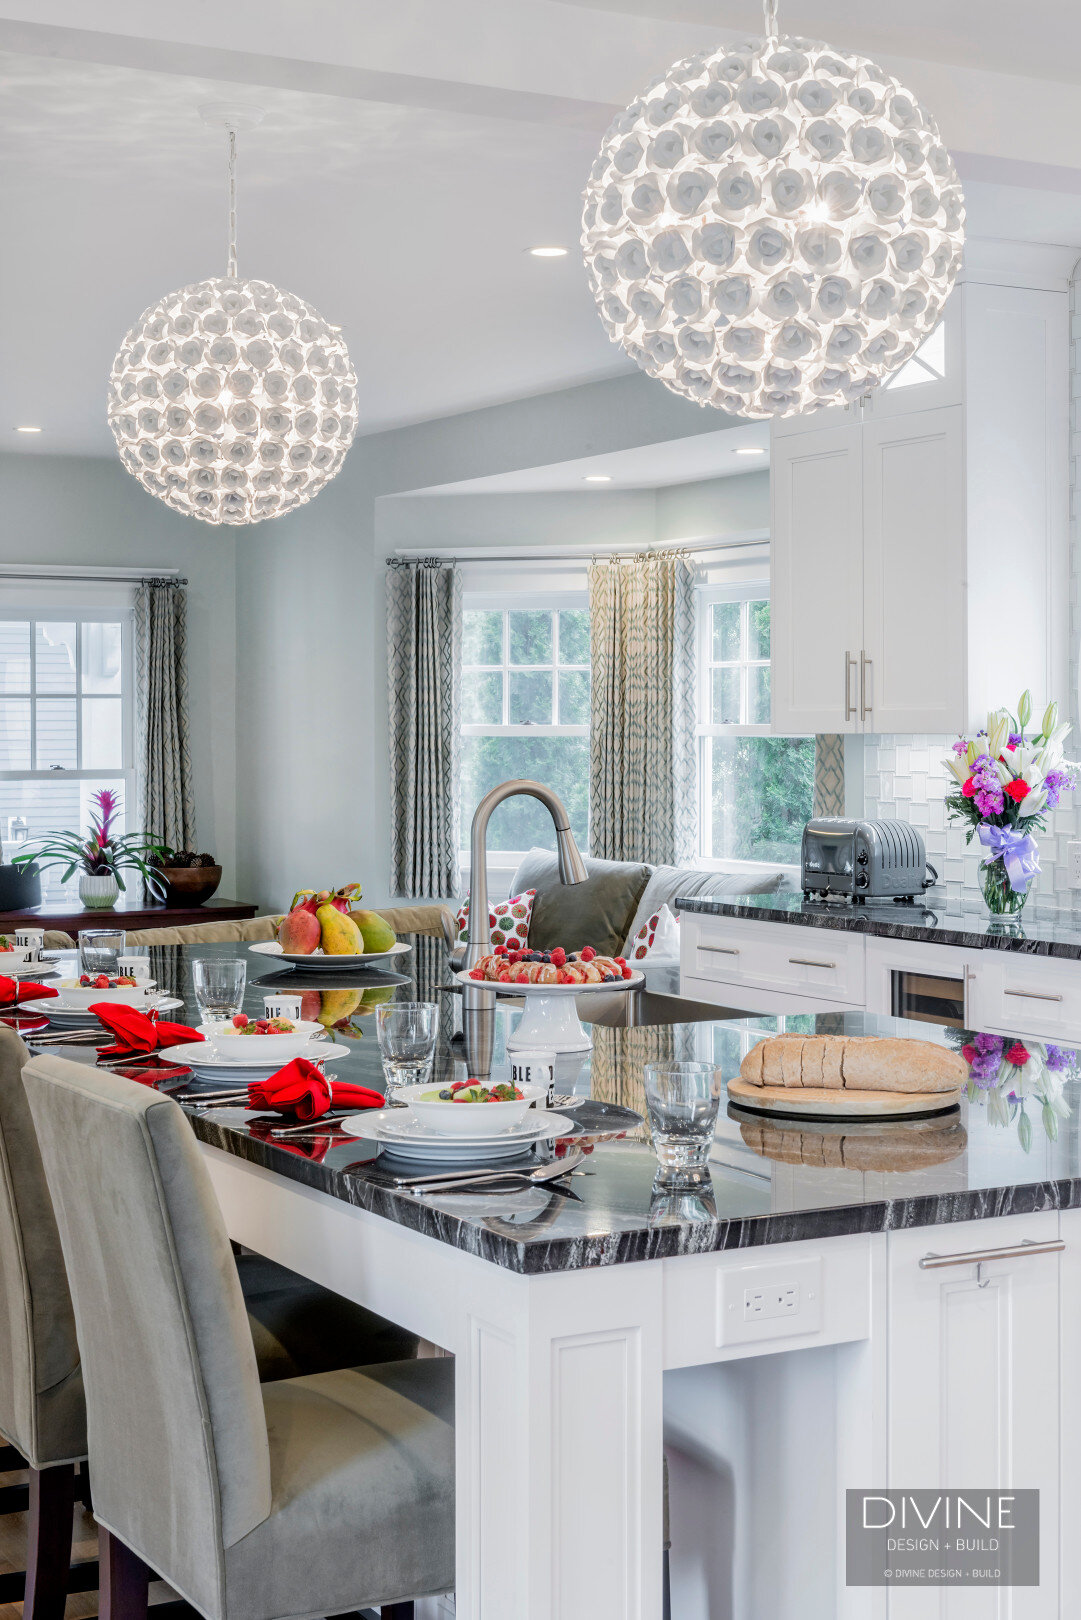  Floral sphere pendant lights with glass tiled back splash. Wolf appliances, stainless steel farmhouse sink. Granite countertops, and white shaker style cabinets.